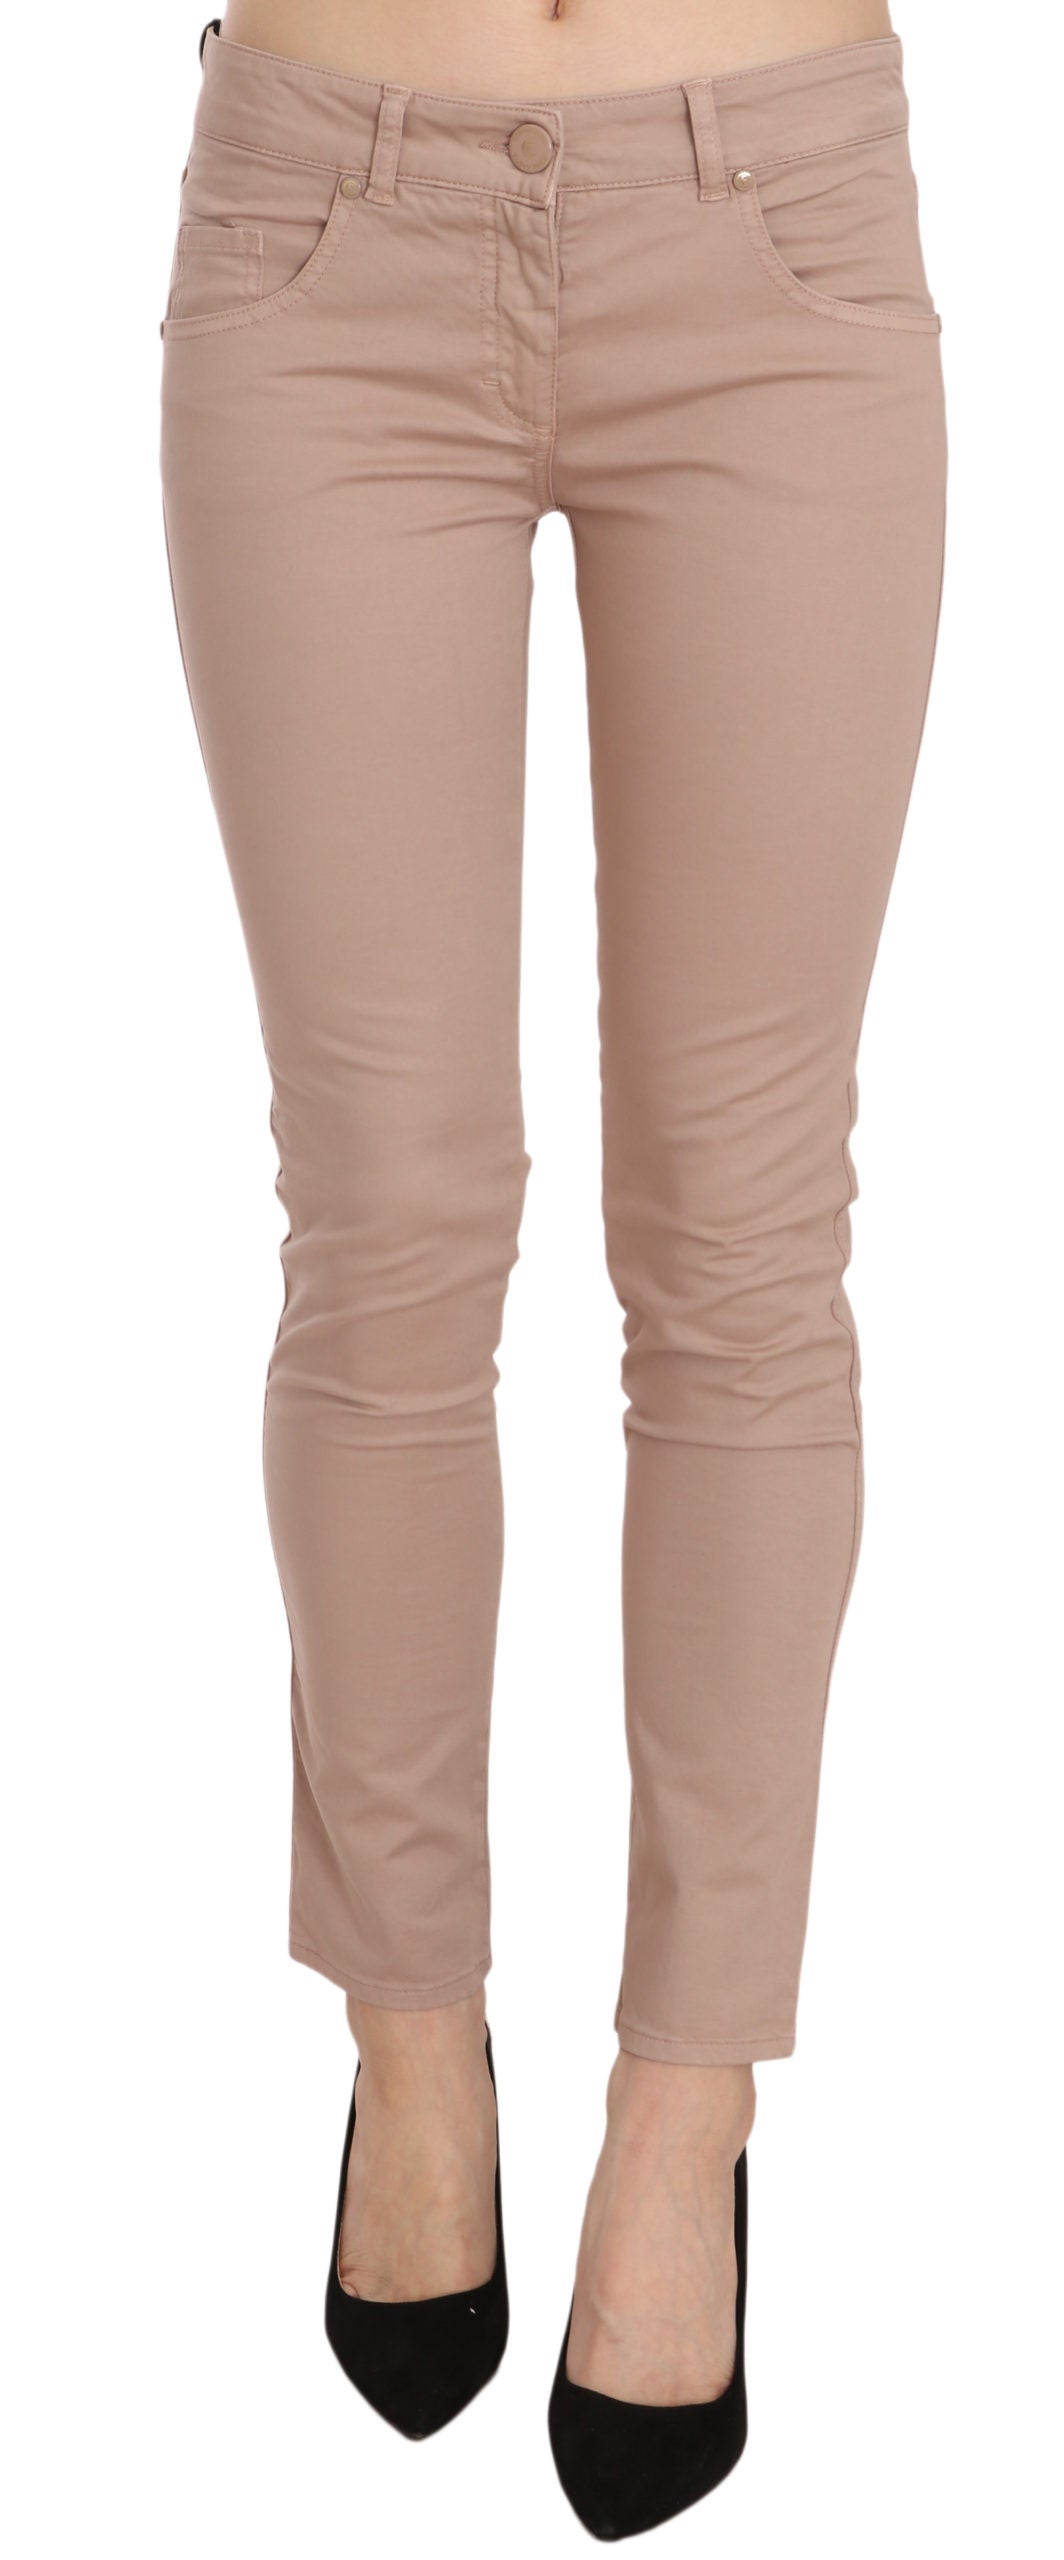 CRISTINAEFFE Brown Low Waist Slim Fit Skinny Cotton Pants - Gio Beverly Hills